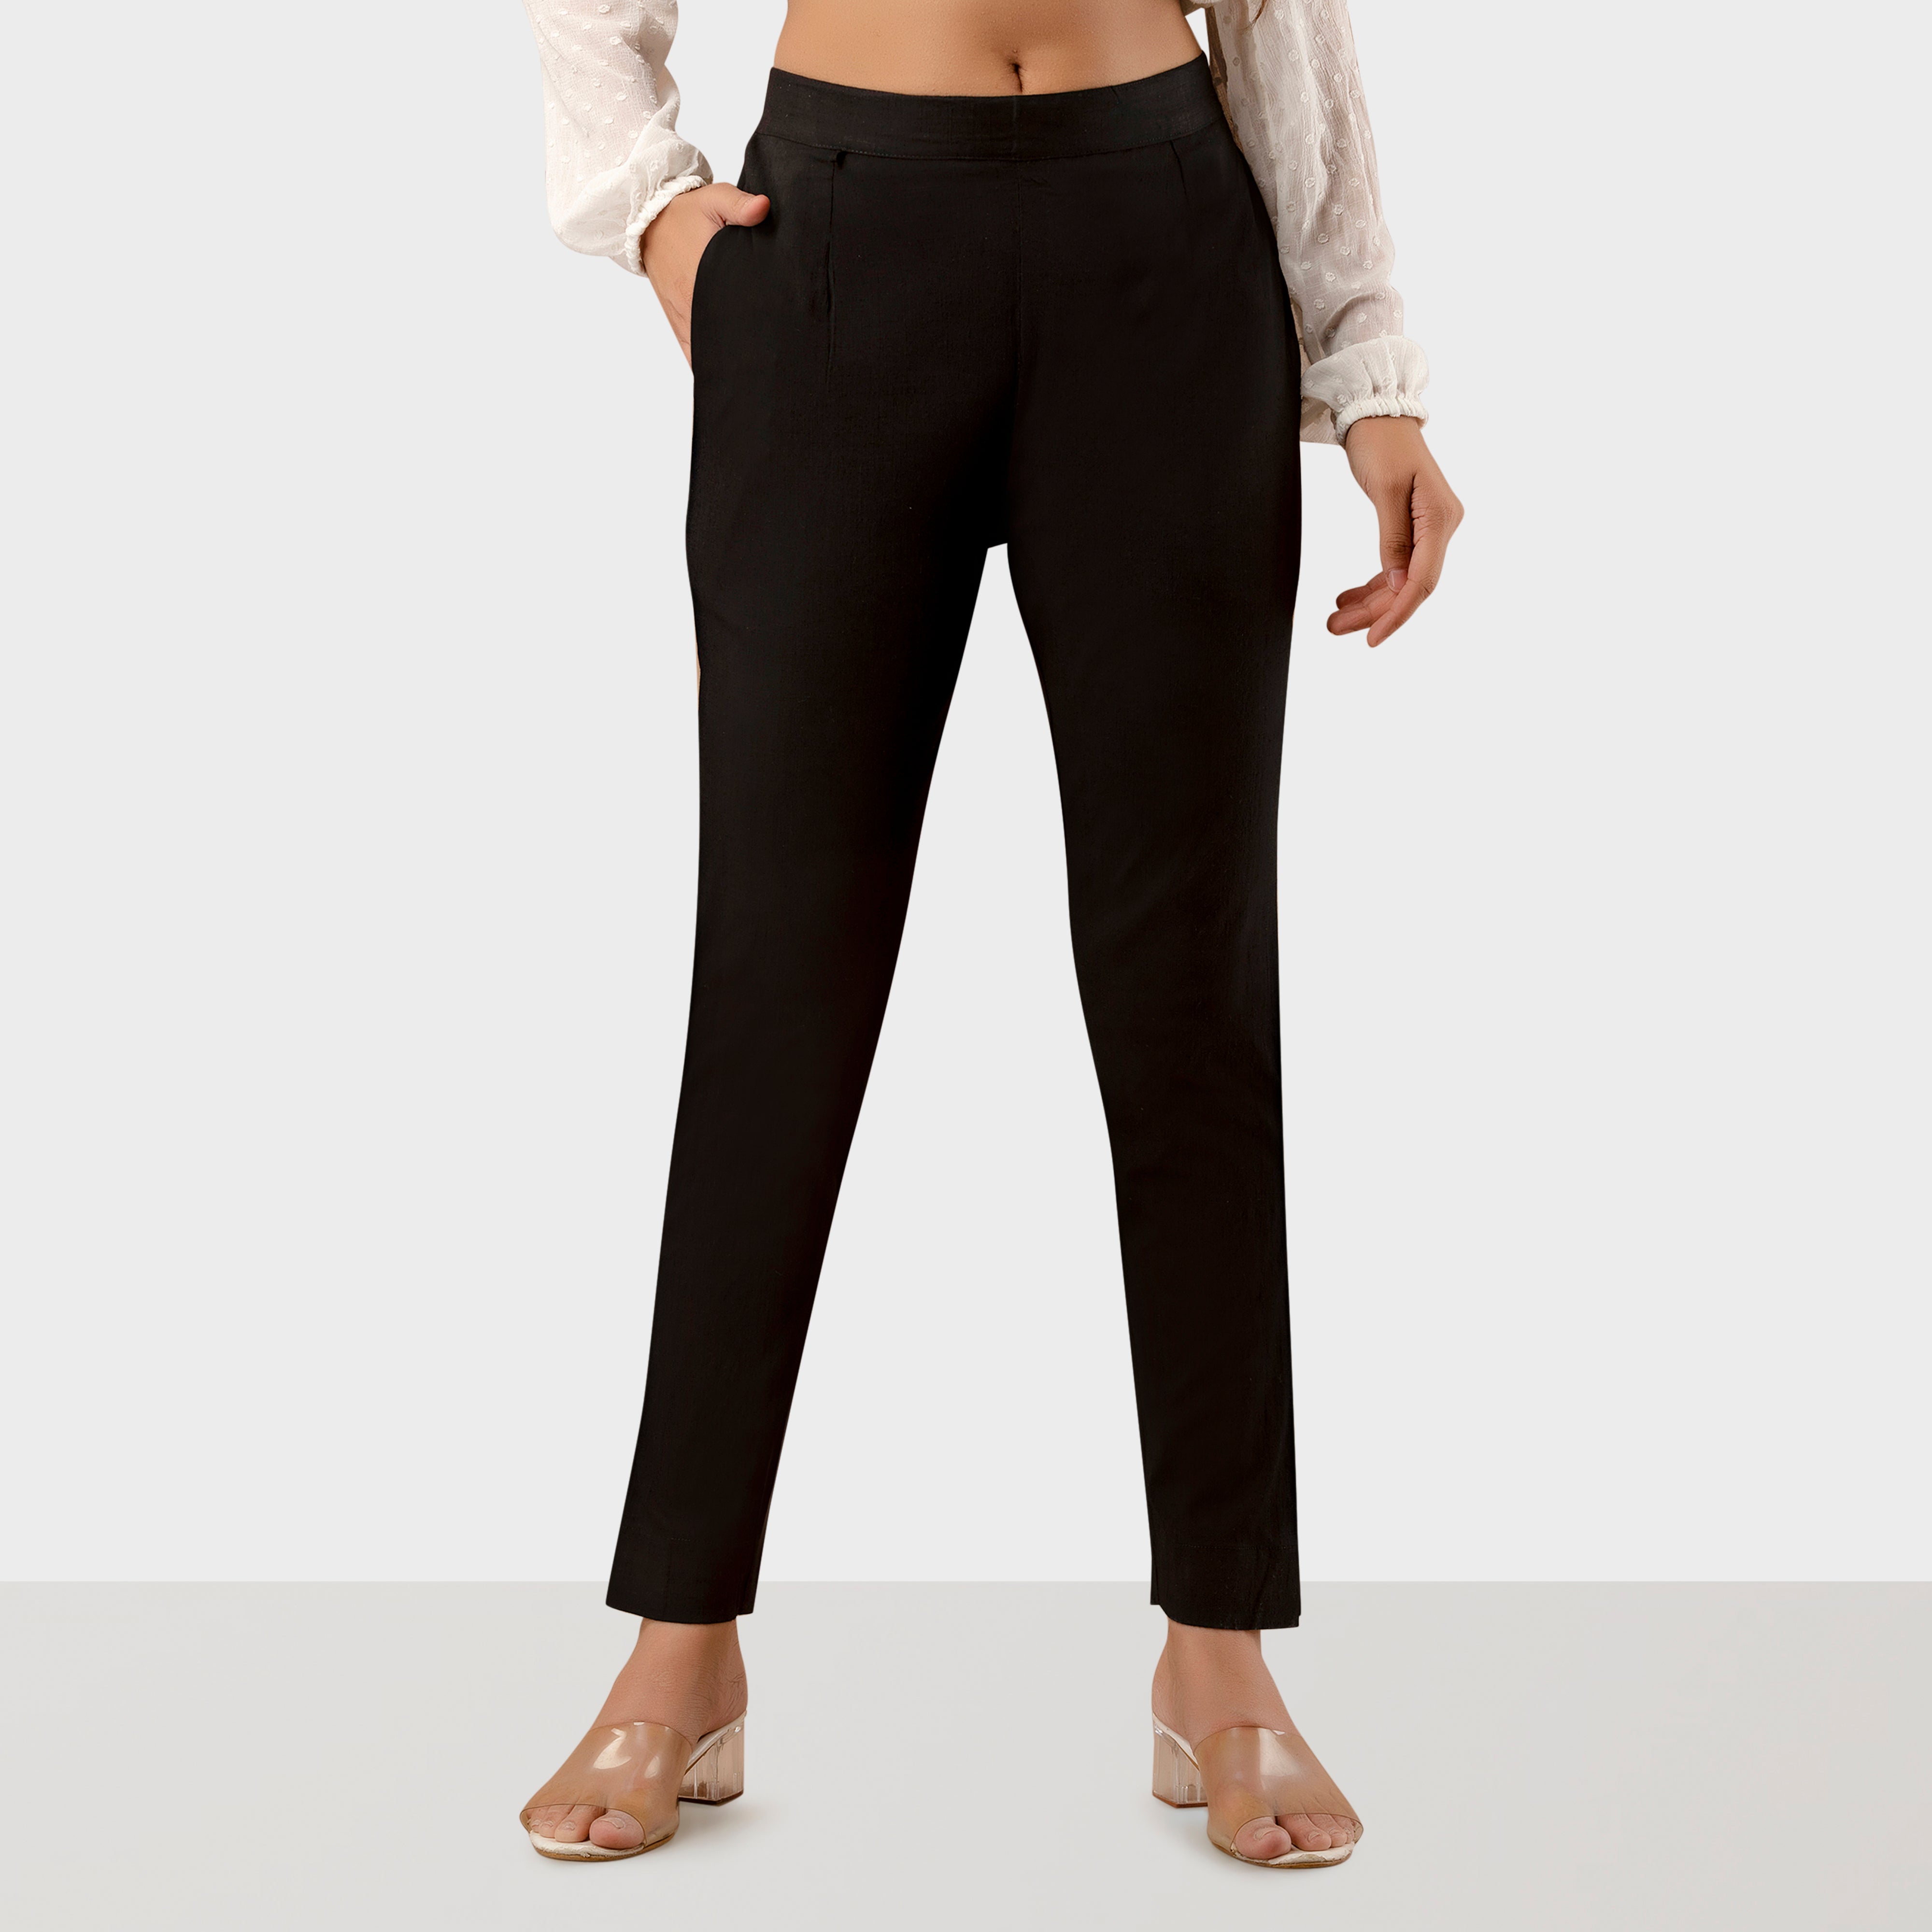 Black Stretchable Fitted Pants